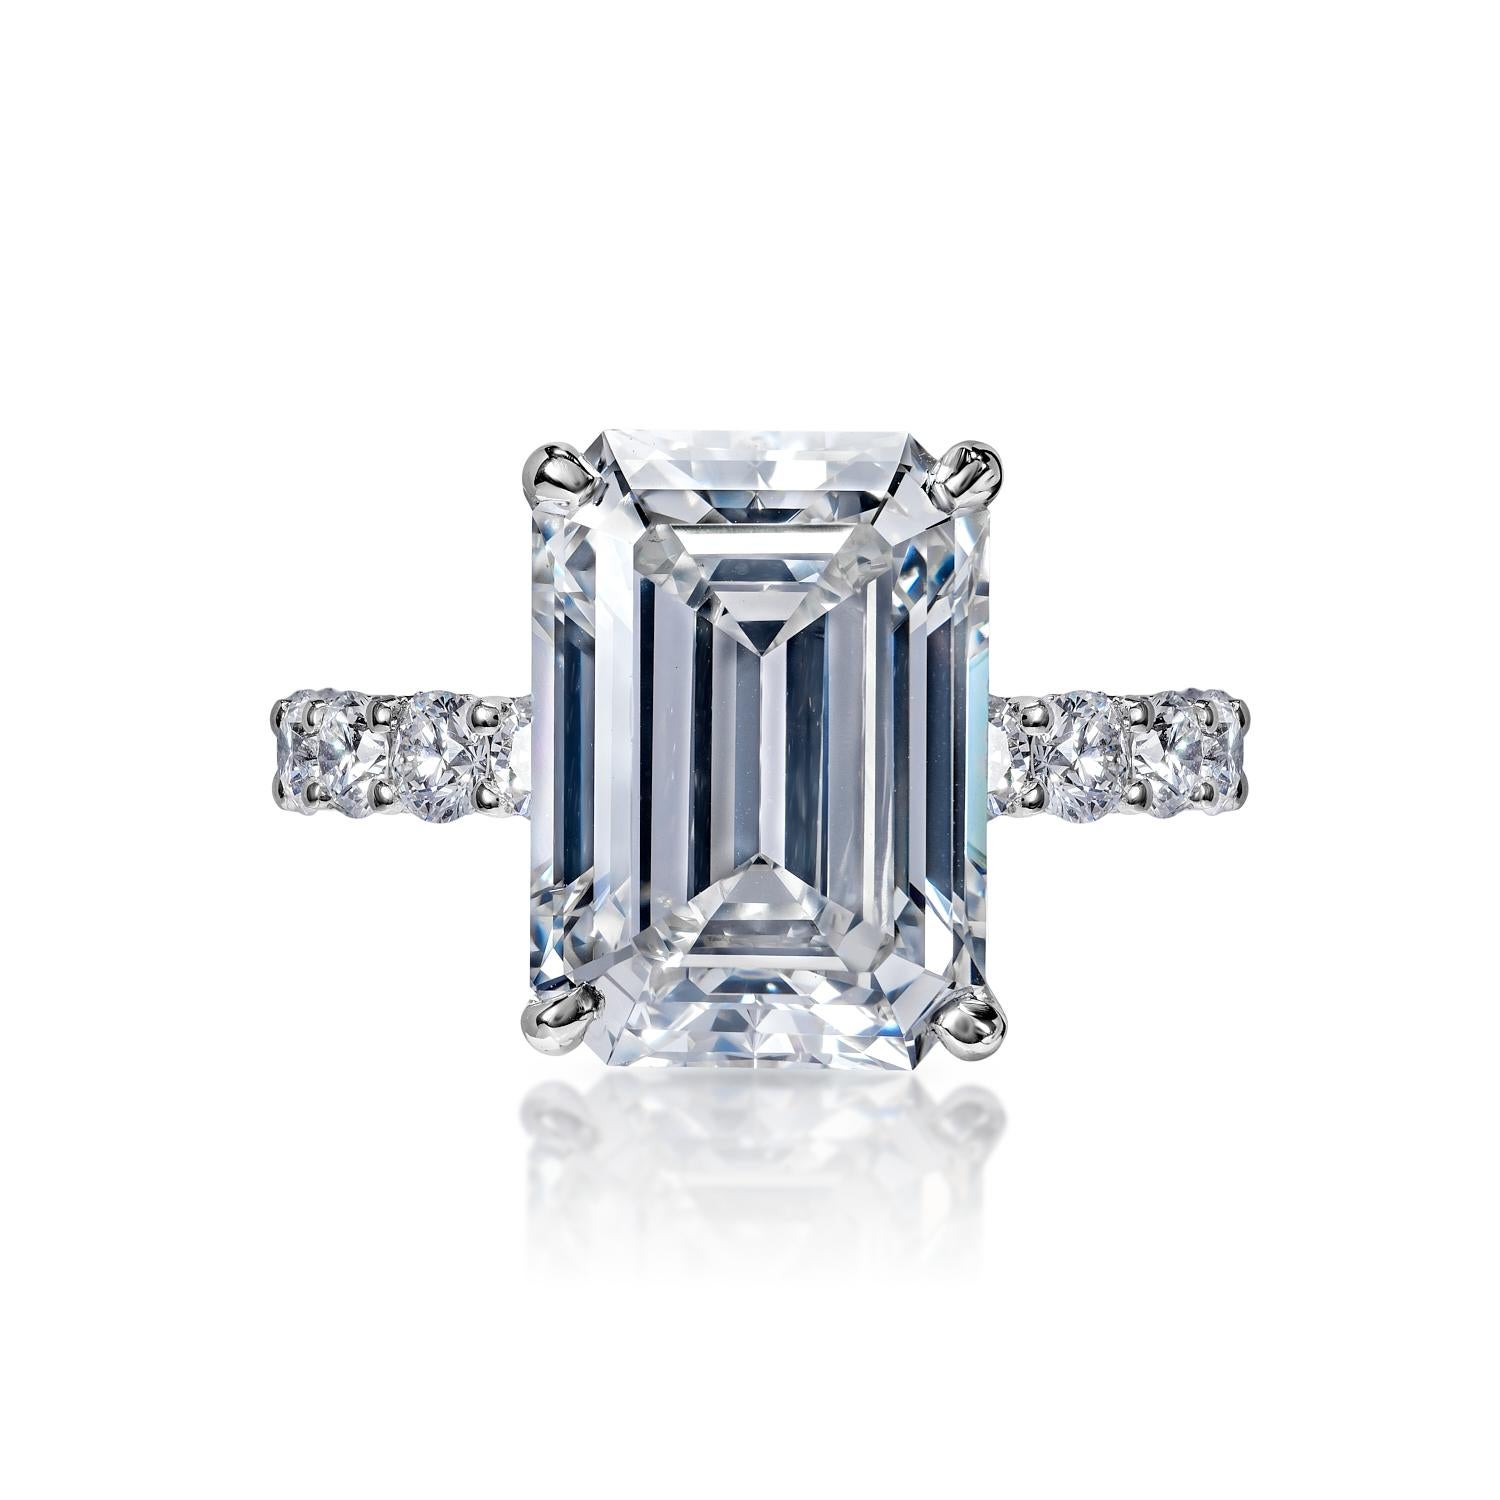 Francesca 10 Carats G IF Emerald Cut Diamond Engagement Ring in 18k White Gold. GIA Certified By Mike Nekta

 

GIA CERTIFIED
Center Diamond:

Carat Weight: 8.11 Carats
Color : G*
Clarity: IF
Style: Emerald Cut

*This Diamond has been treated by one